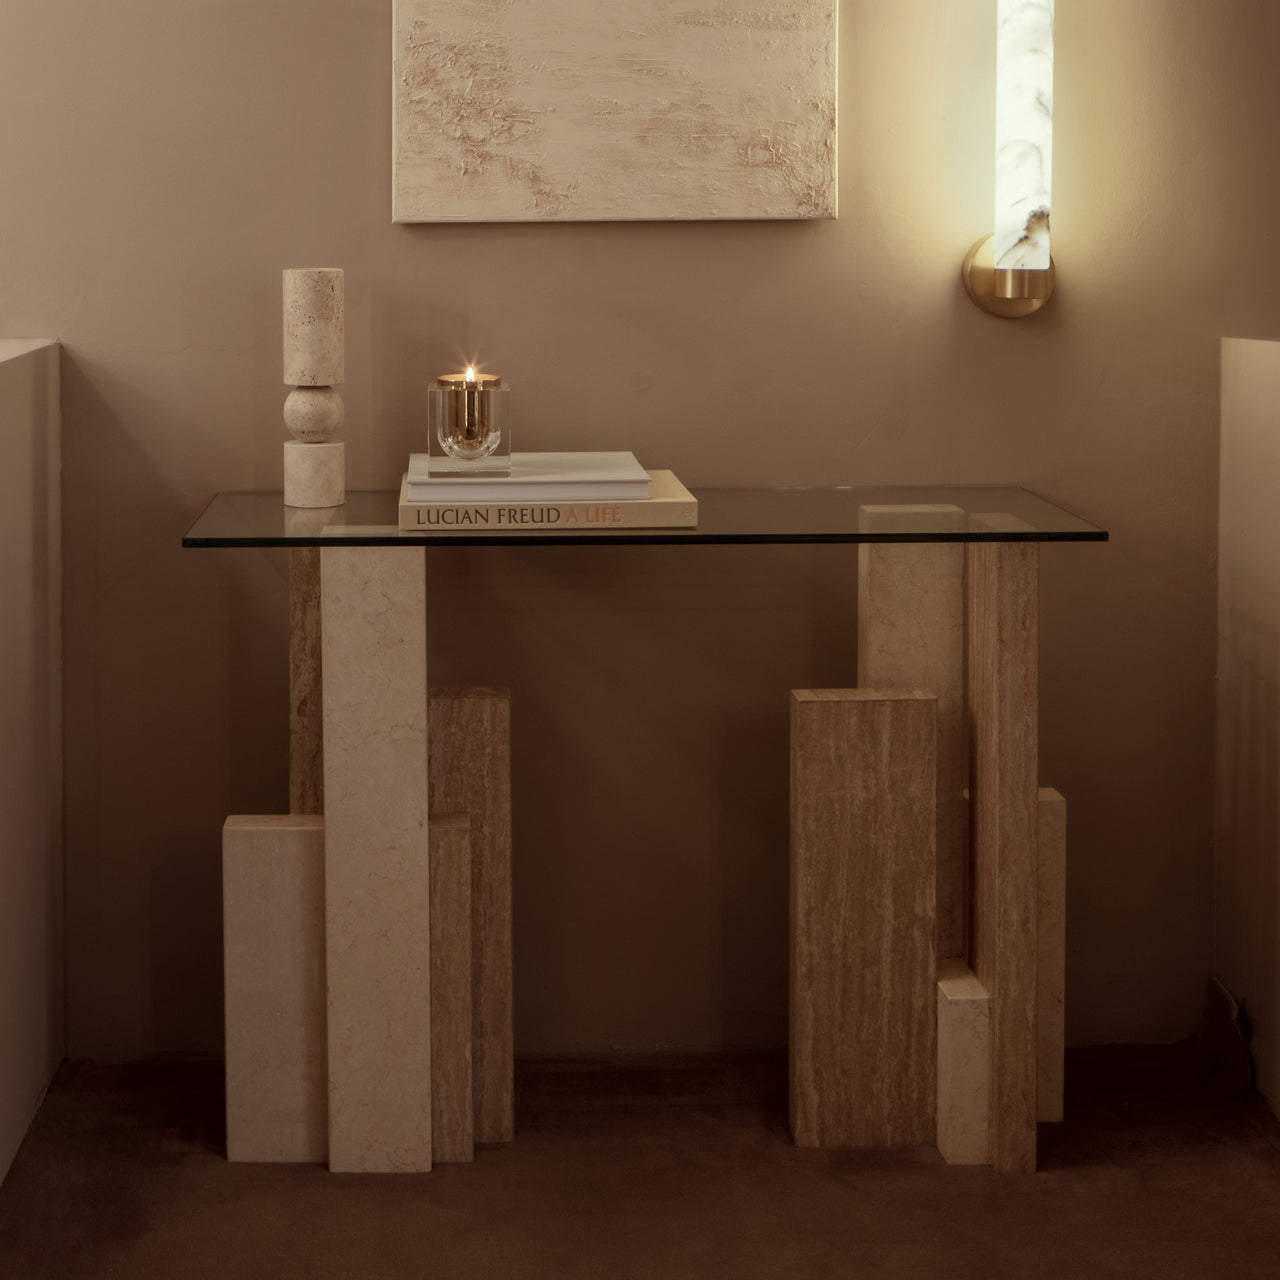 Fulcrum Candlestick: Marble